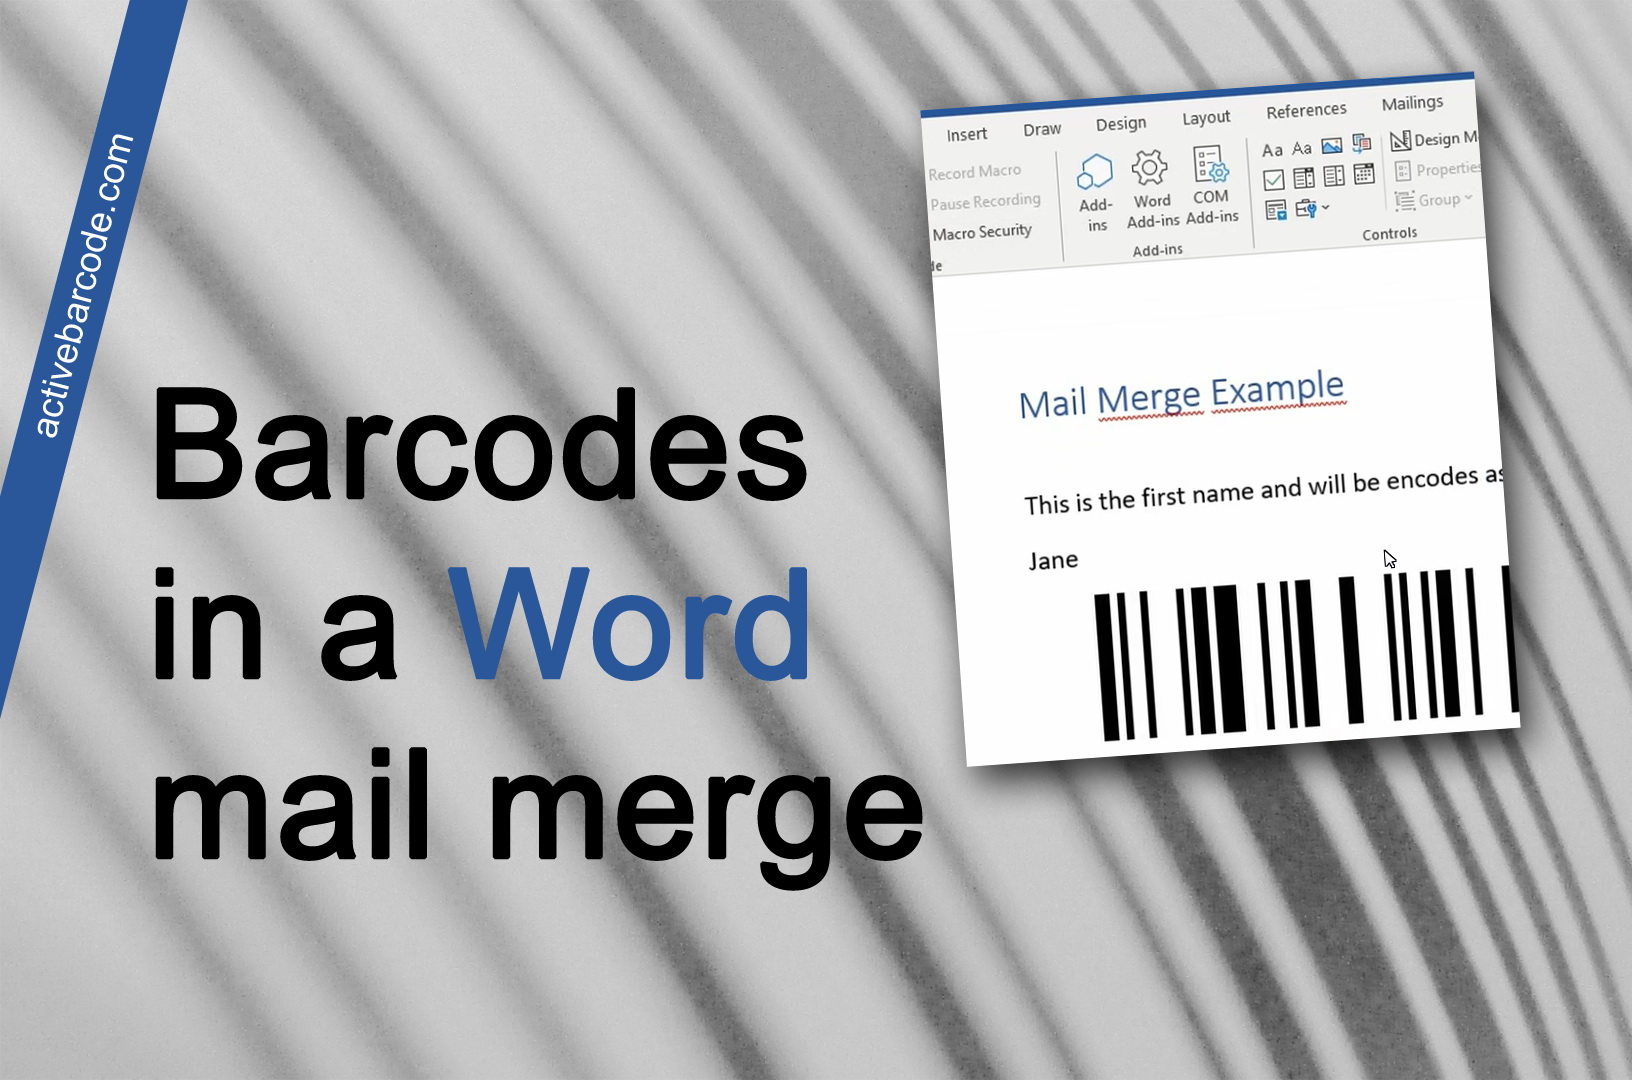 ActiveBarcode: How to add a barcode to an existing mail merge.